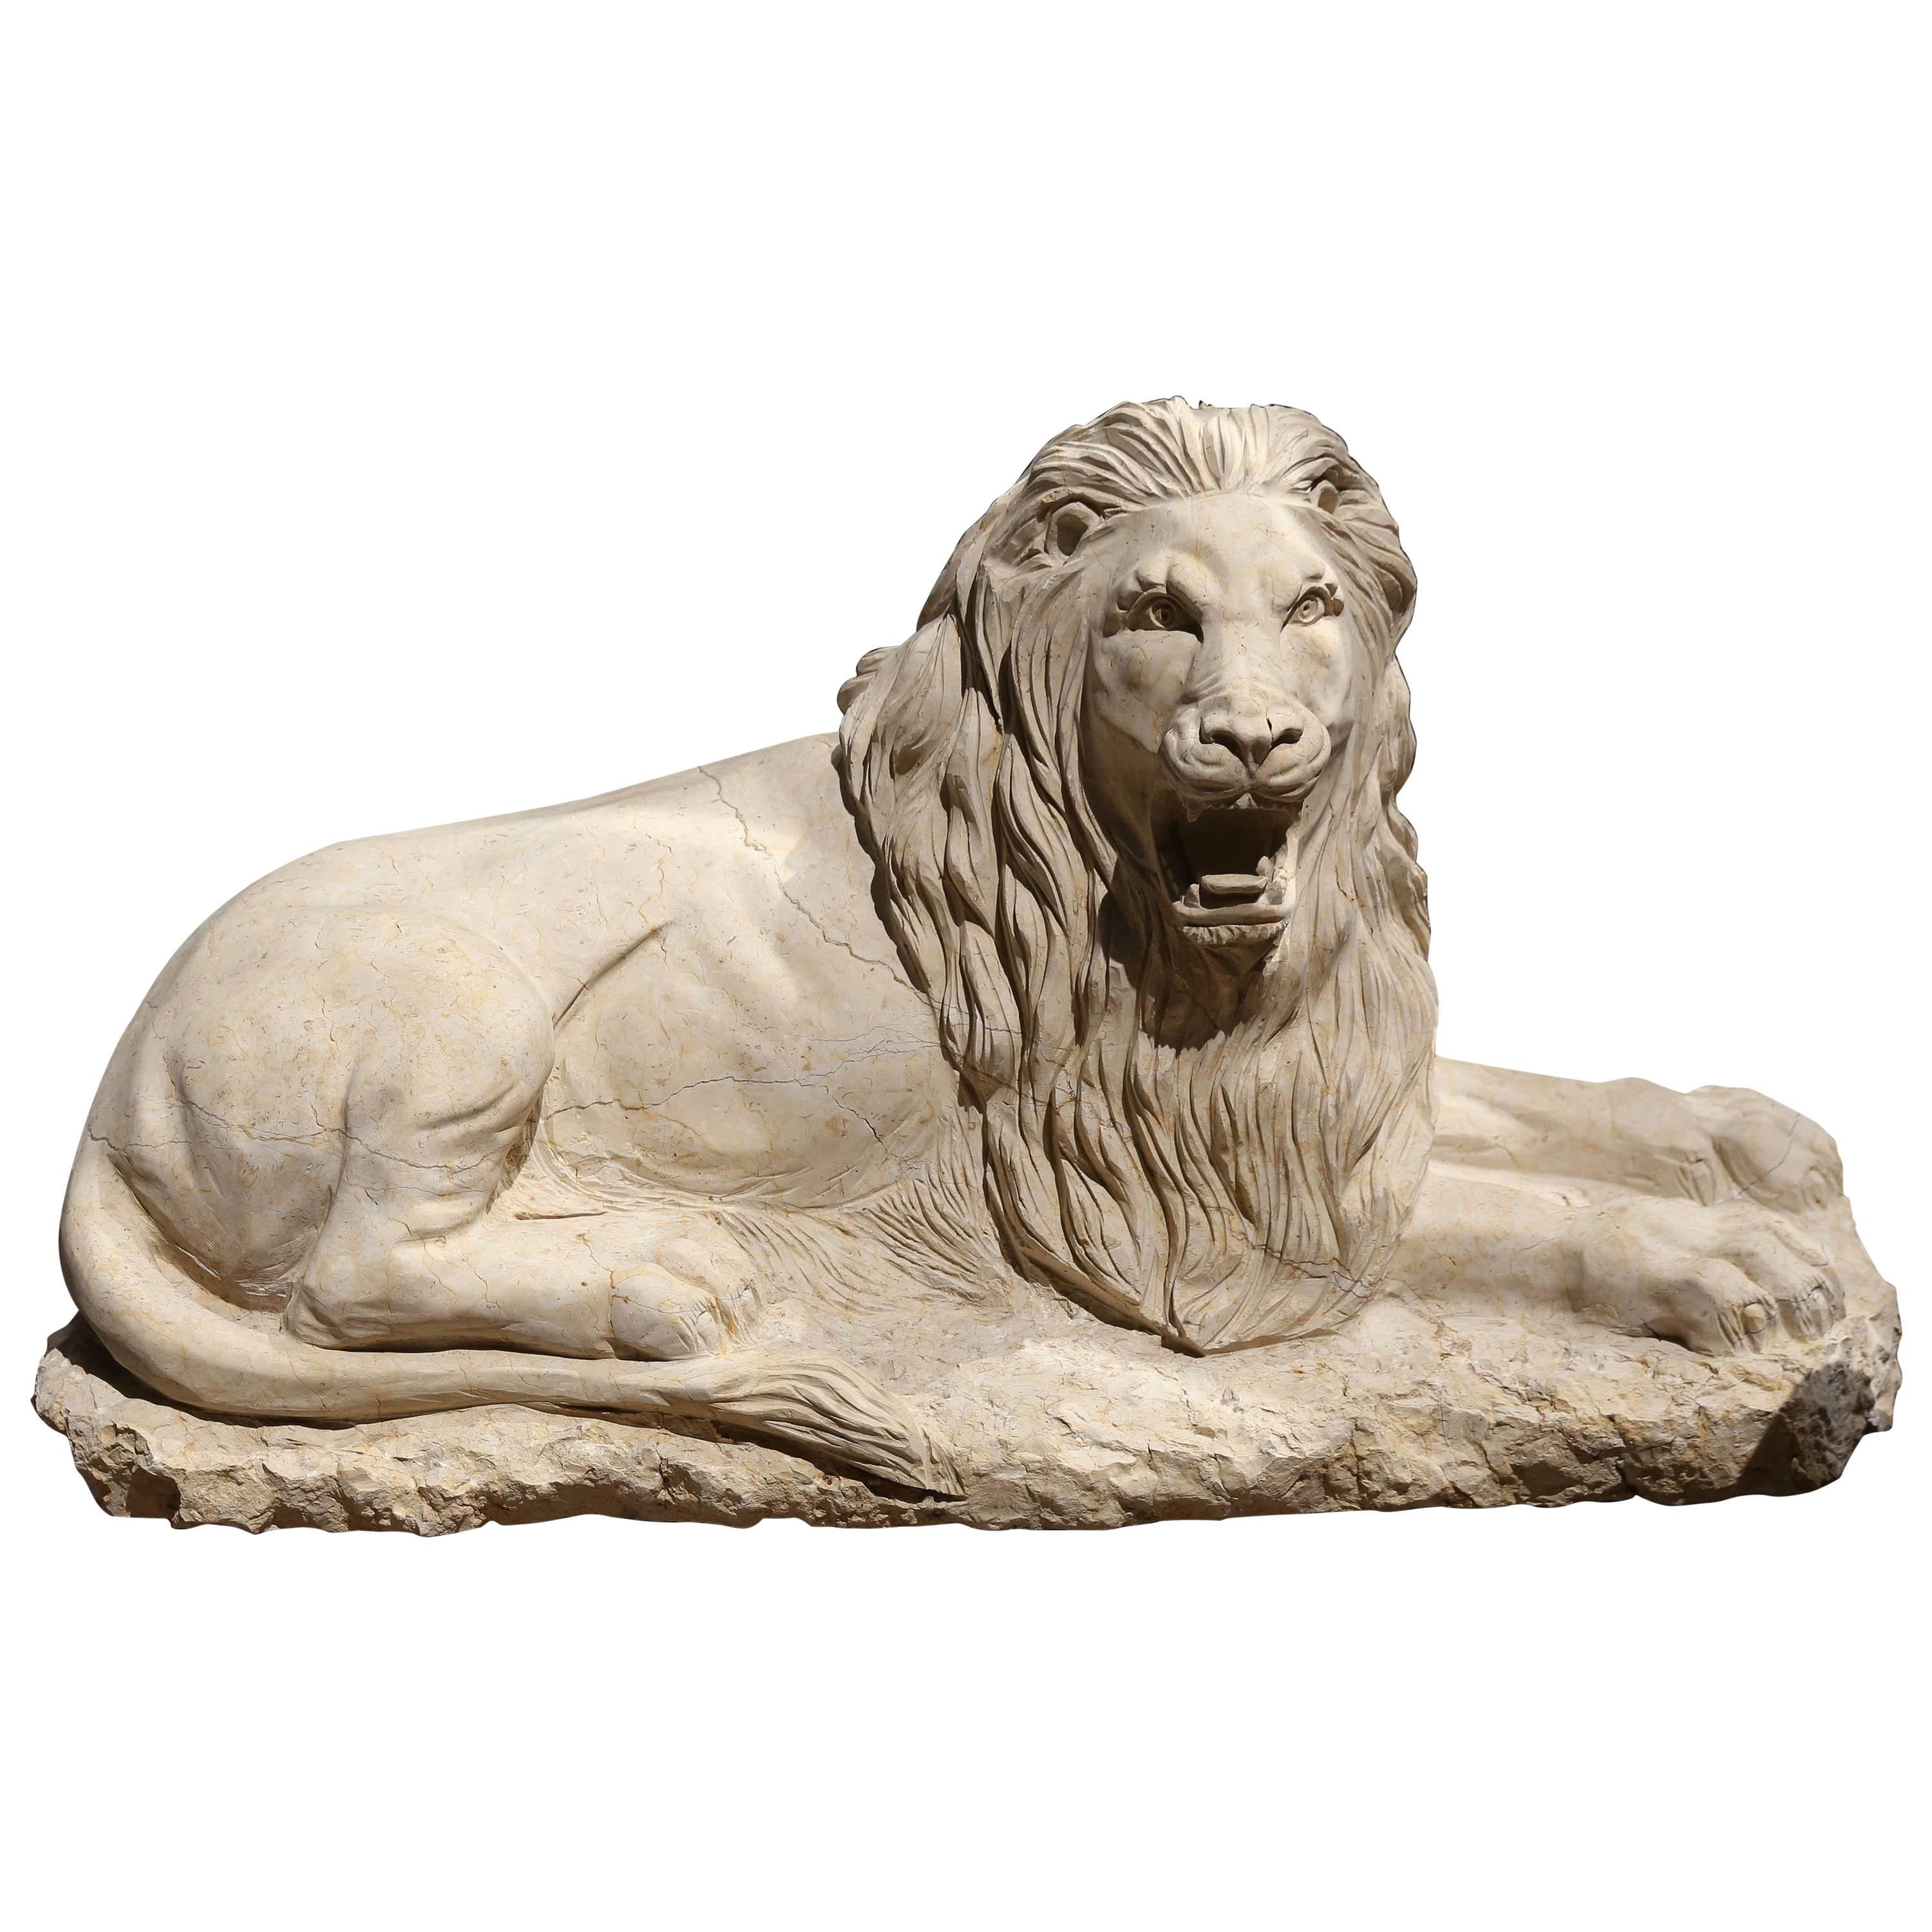 Cream Marble Carved Lion Sculpture